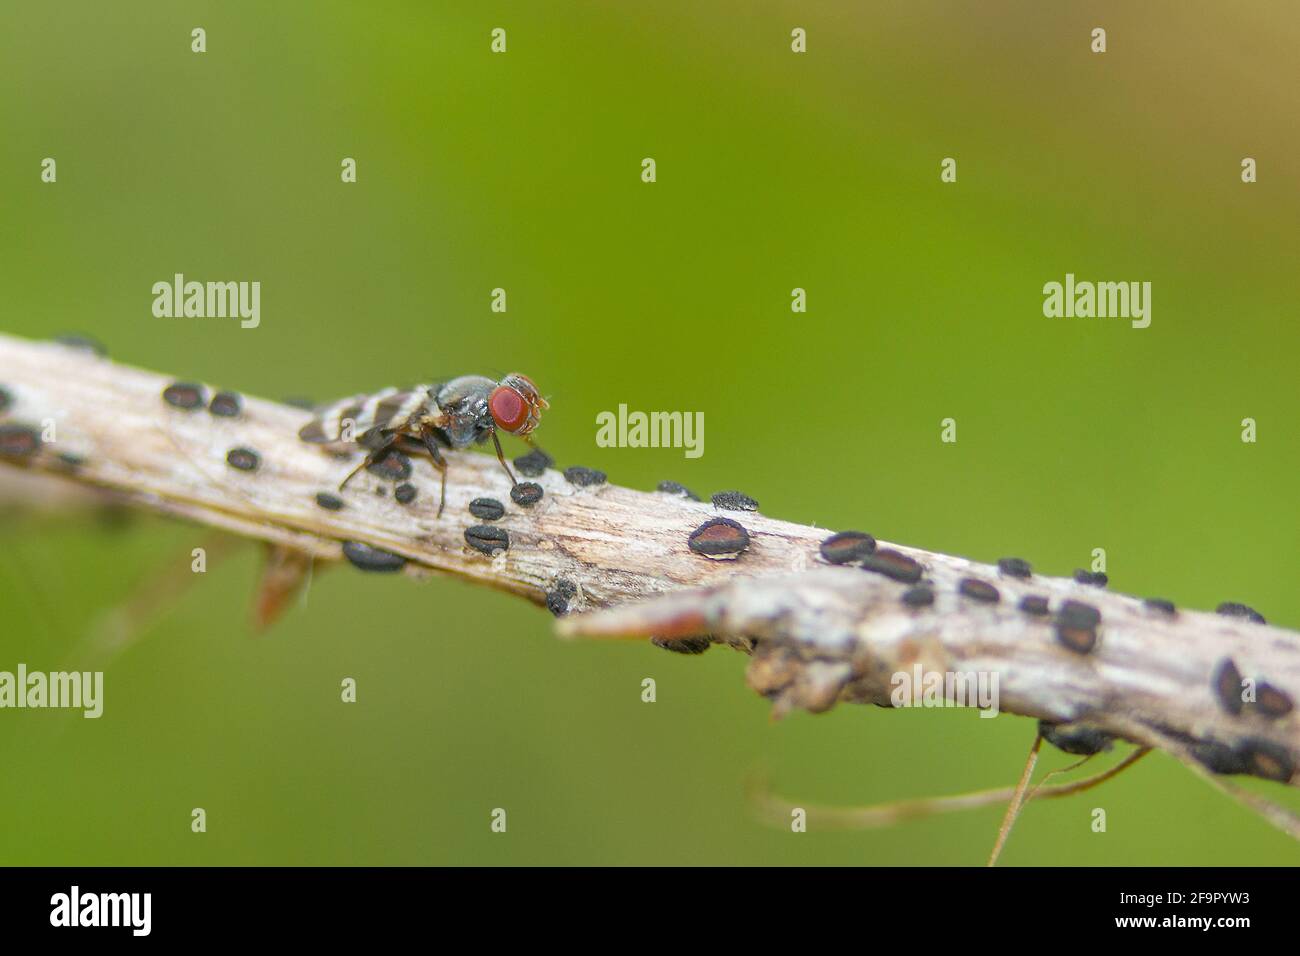 Aphid and ants on a twig Stock Photo